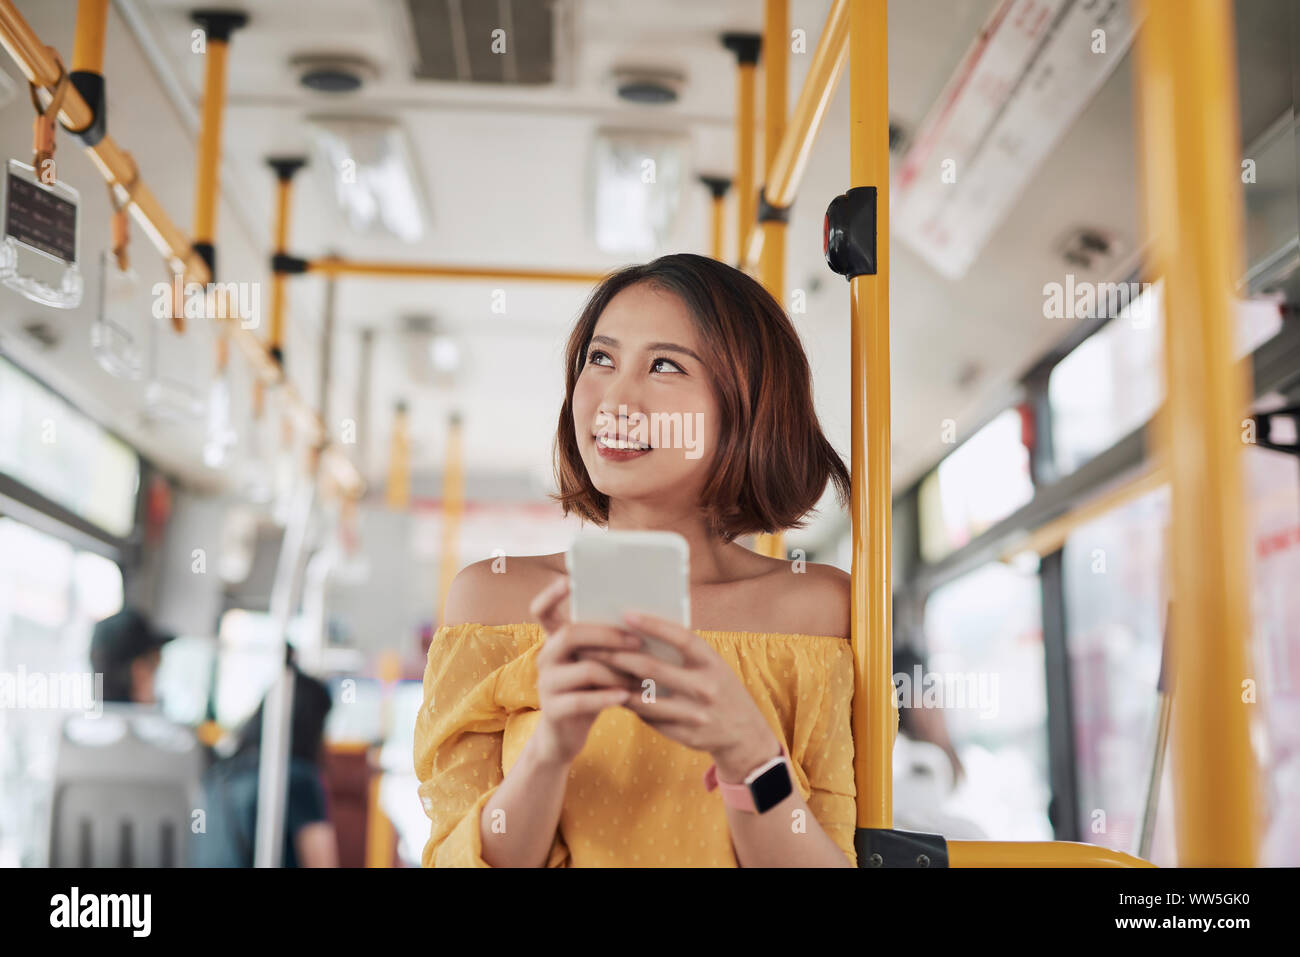 The passenger use smartphone in the bus or train, technology lifestyle, transportation and traveling concept Stock Photo